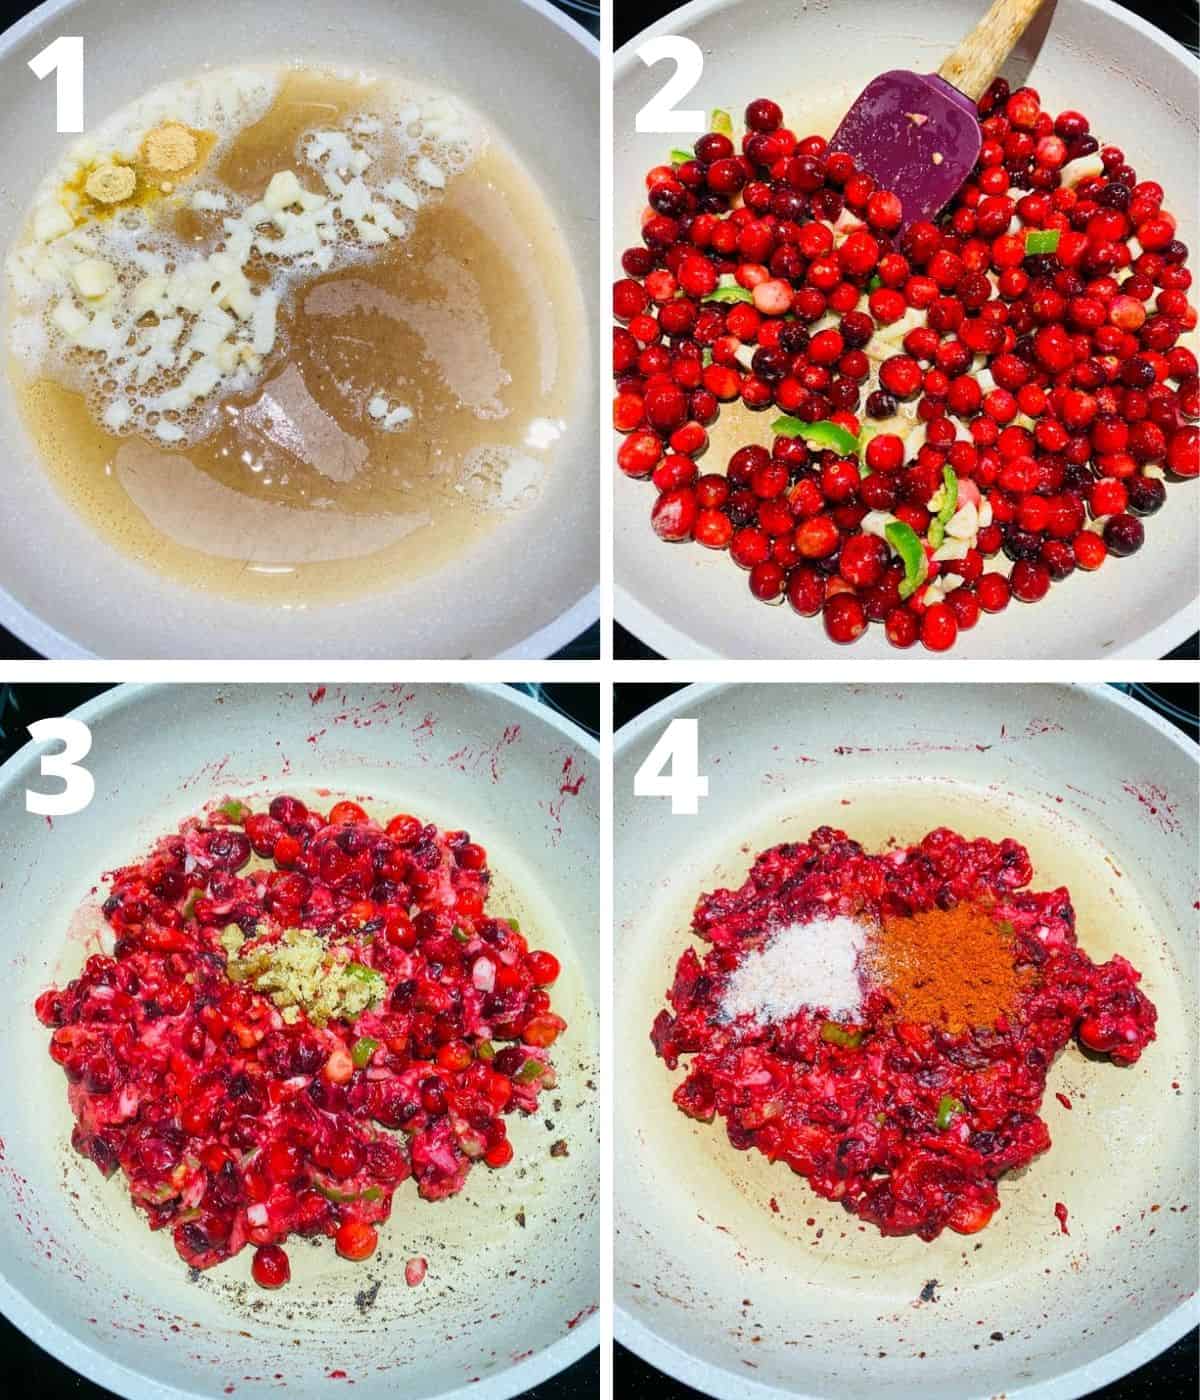 This is a collage image of first four steps of making Indian style cranberry chutney. This shows steps until adding salt and red chili powder.